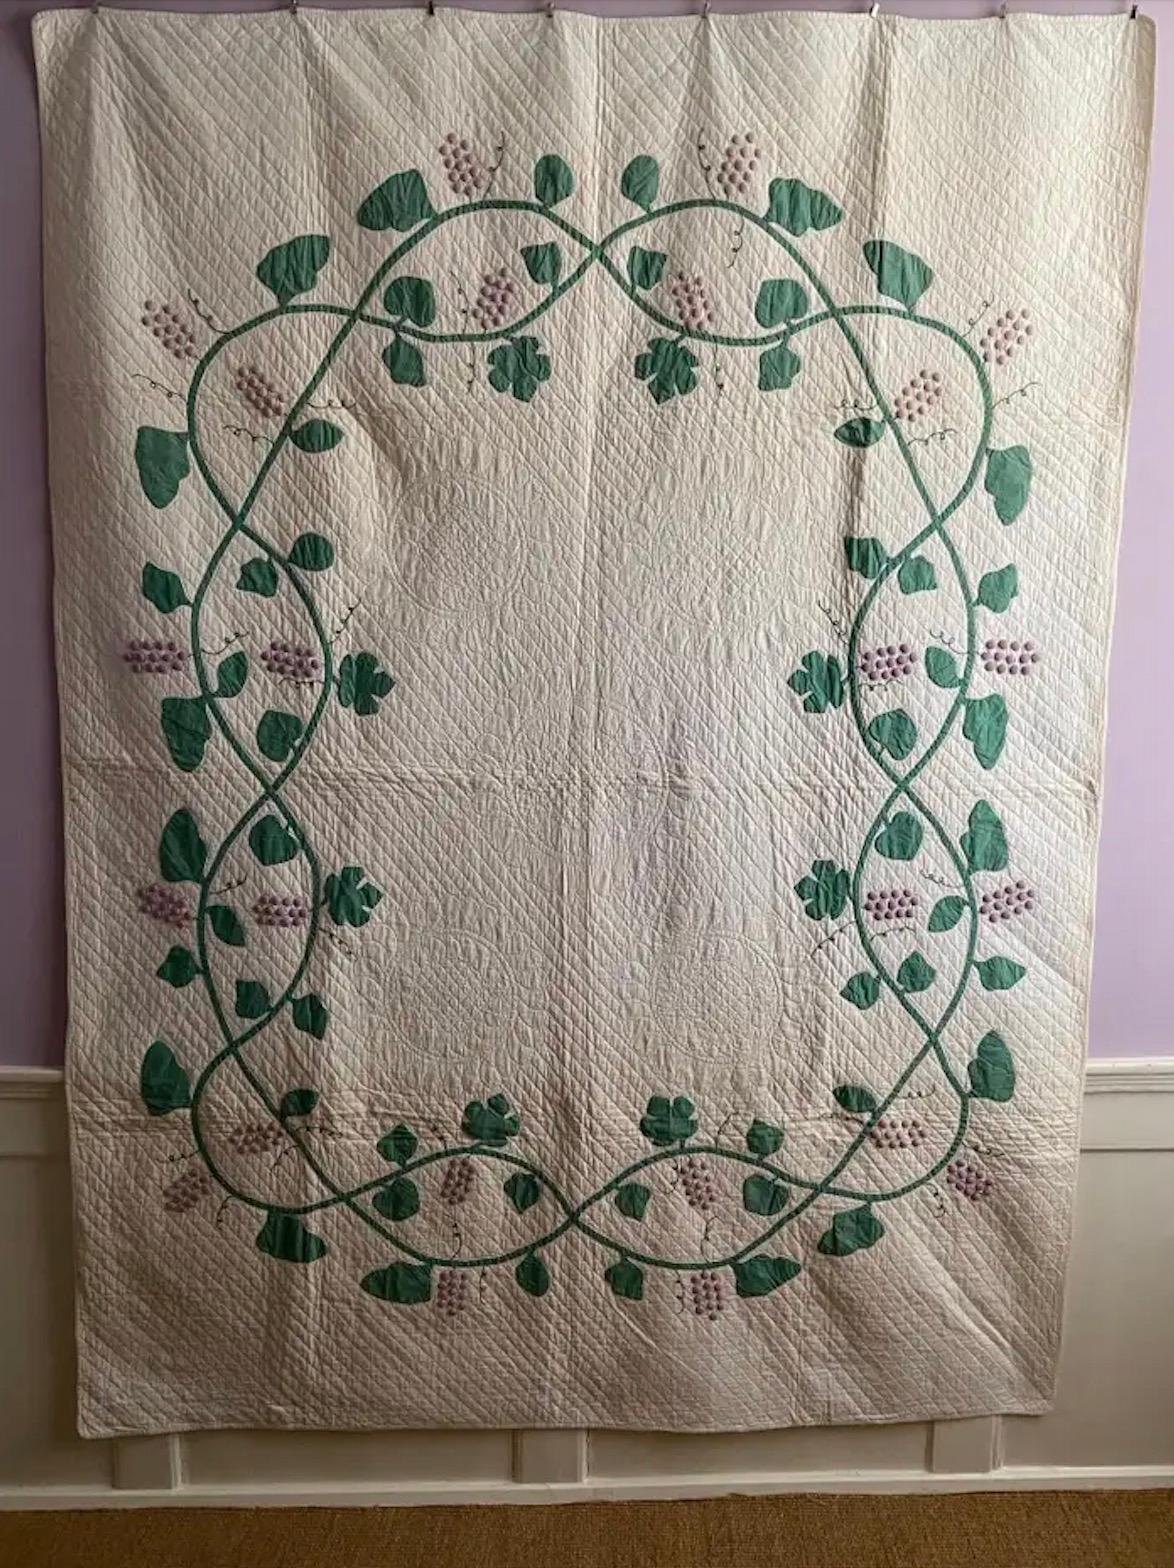 American Antique Cotton “Grapes” Quilt in White and Purple with Fine Details, USA, 1920s